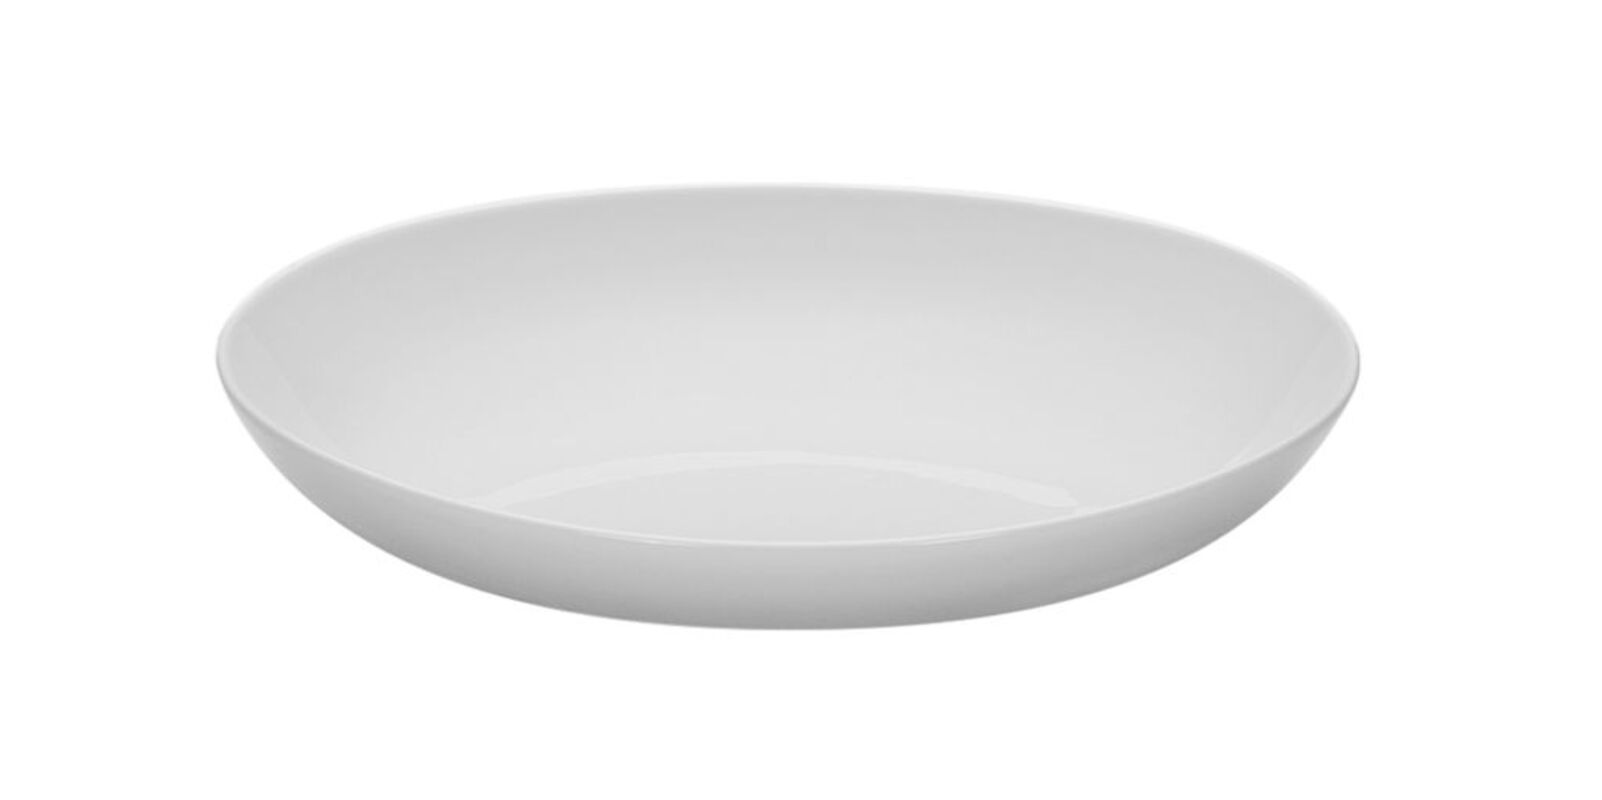 White Oval Bowl 33.8 oz Options by Bauscher